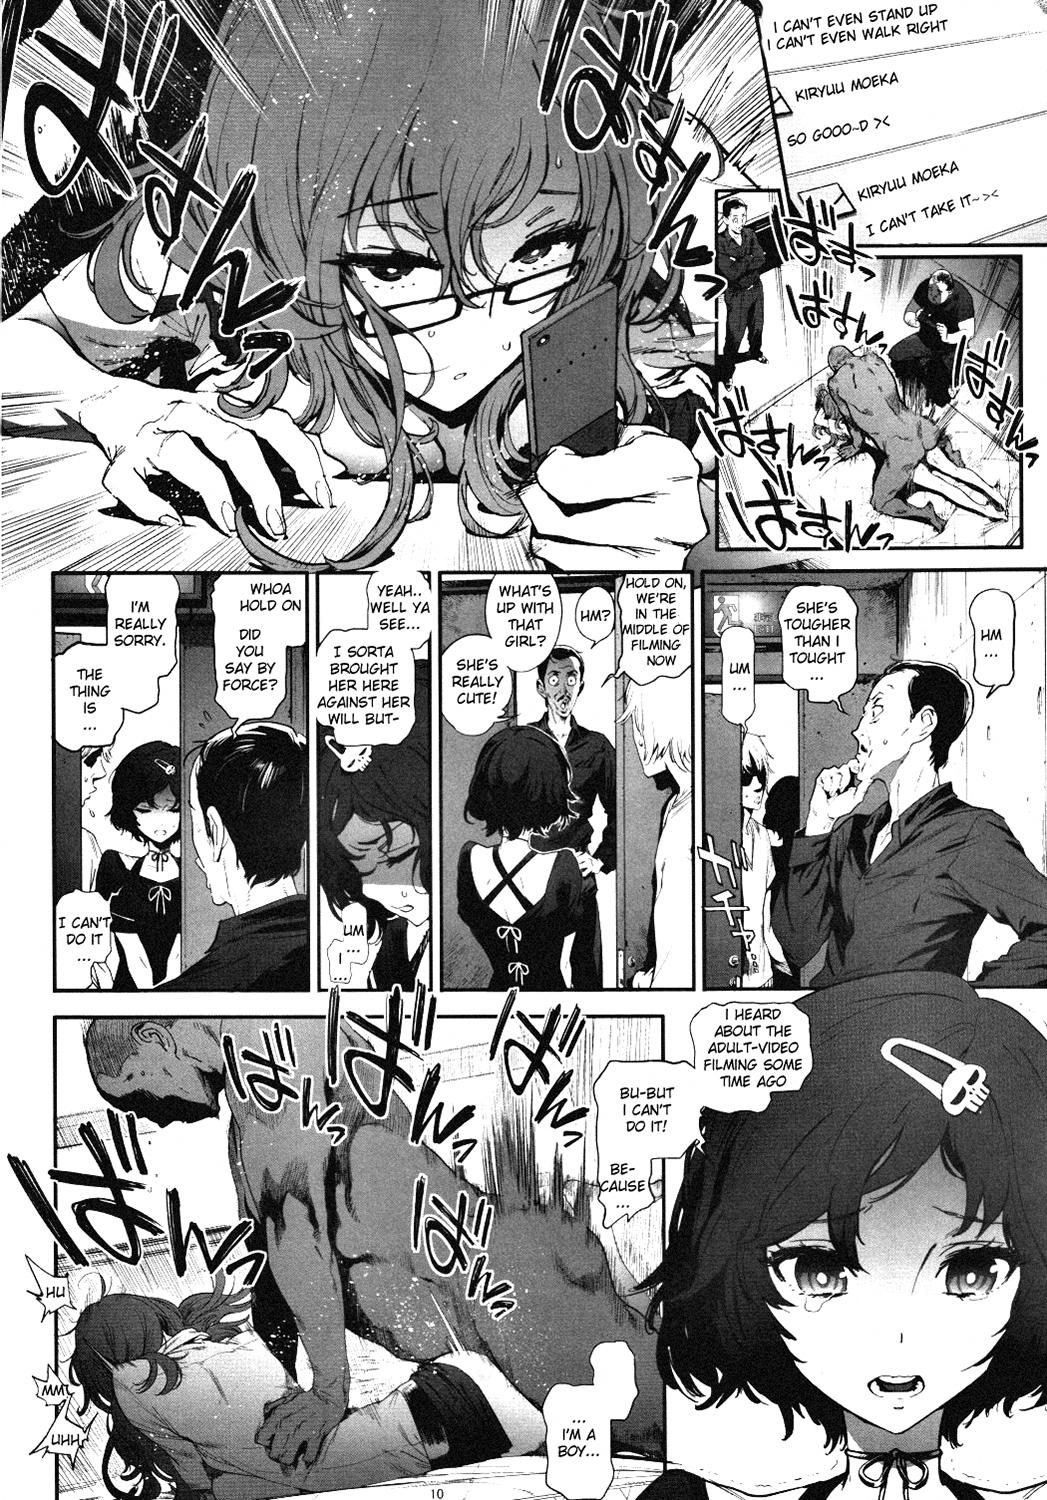 Punished Moeka's Gate - Steinsgate Pounding - Page 9